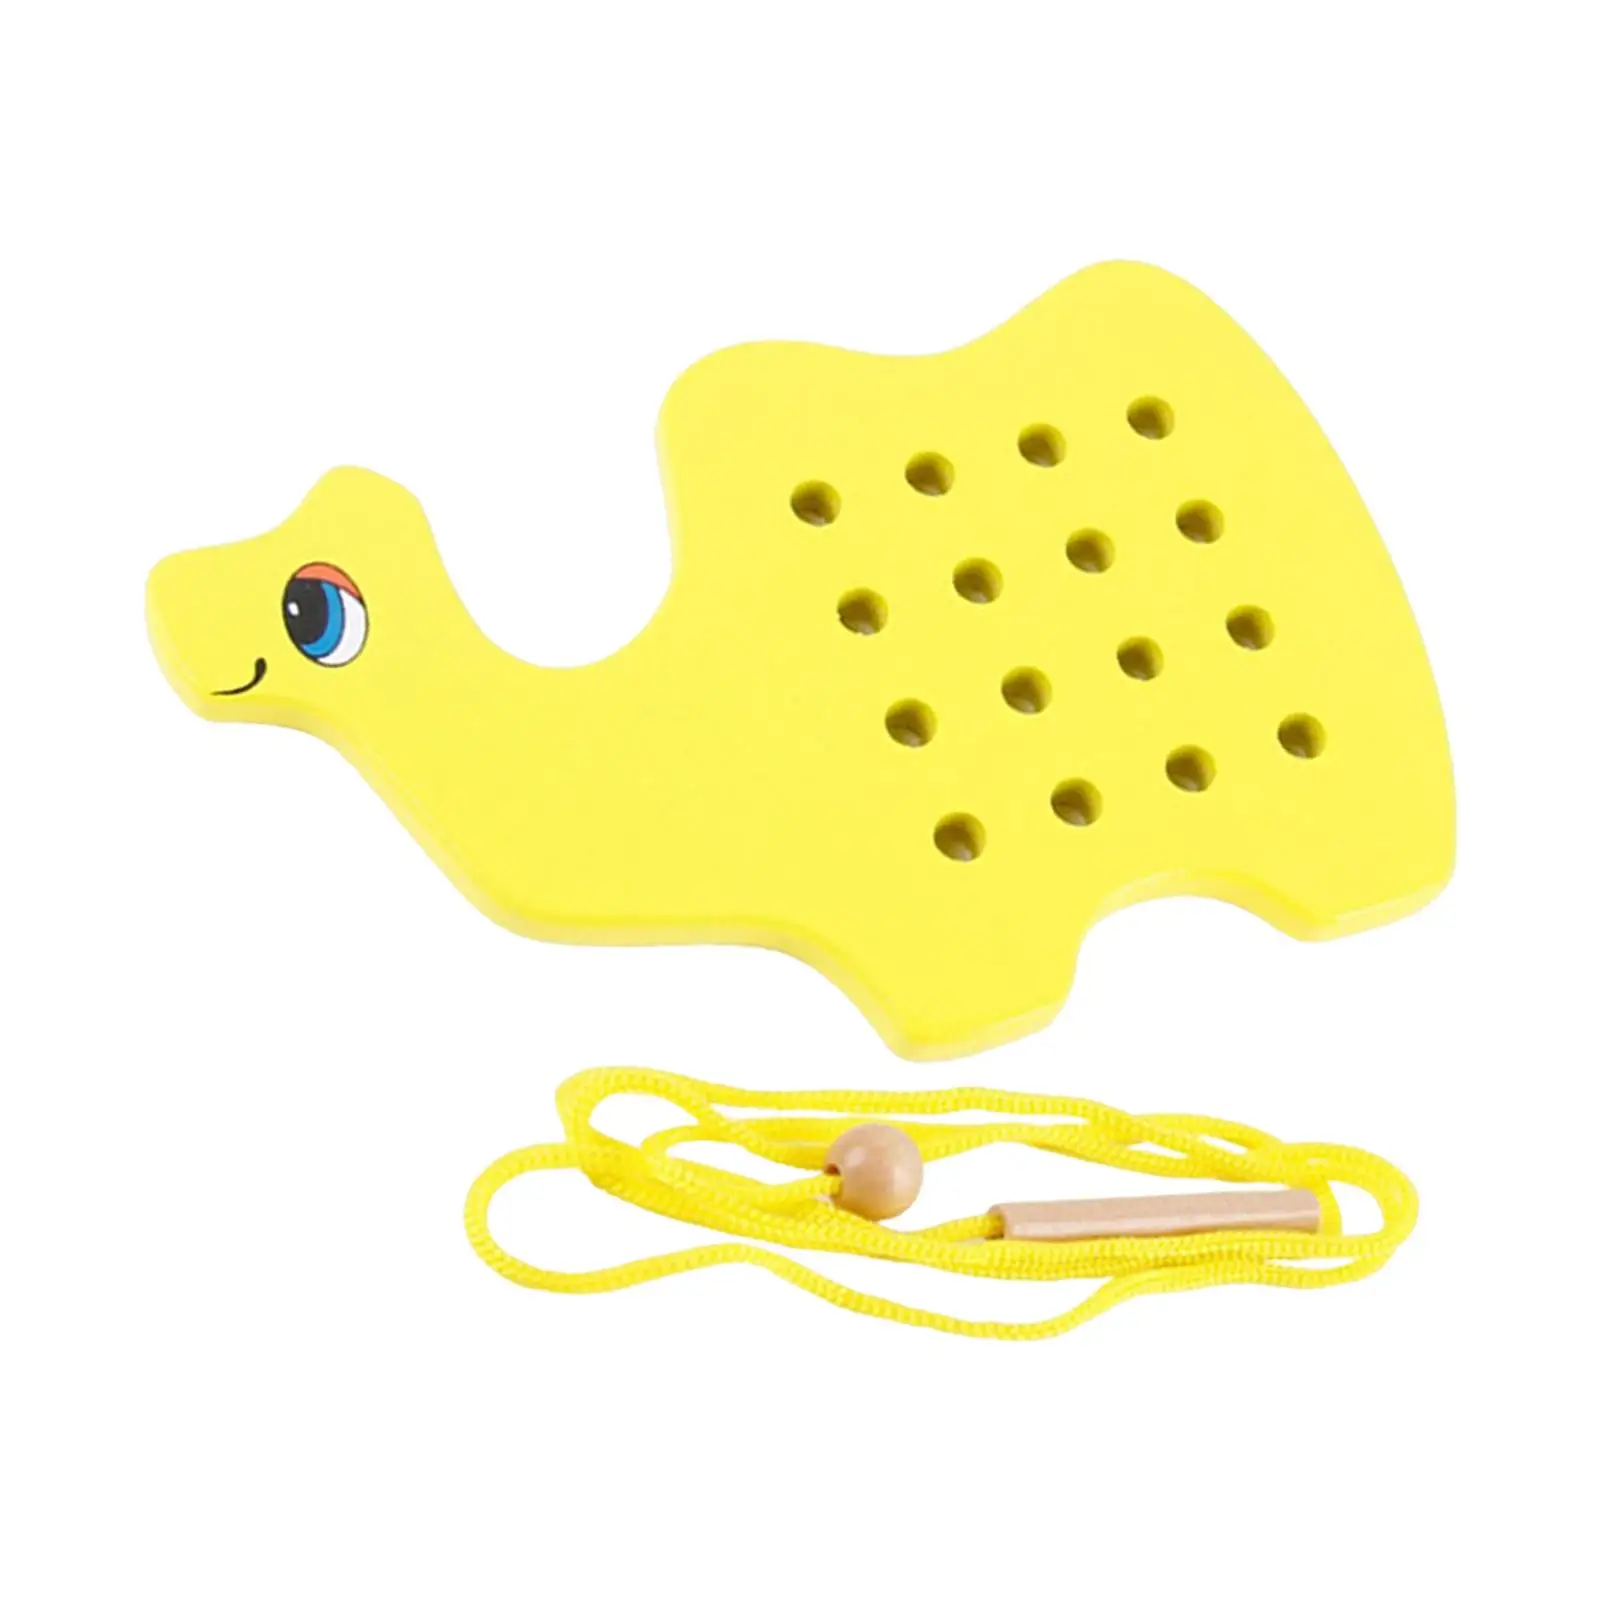 Lacing Threading Toys Early Learning Teaching Aids Kindergarten for Kids Boys Kids Gifts